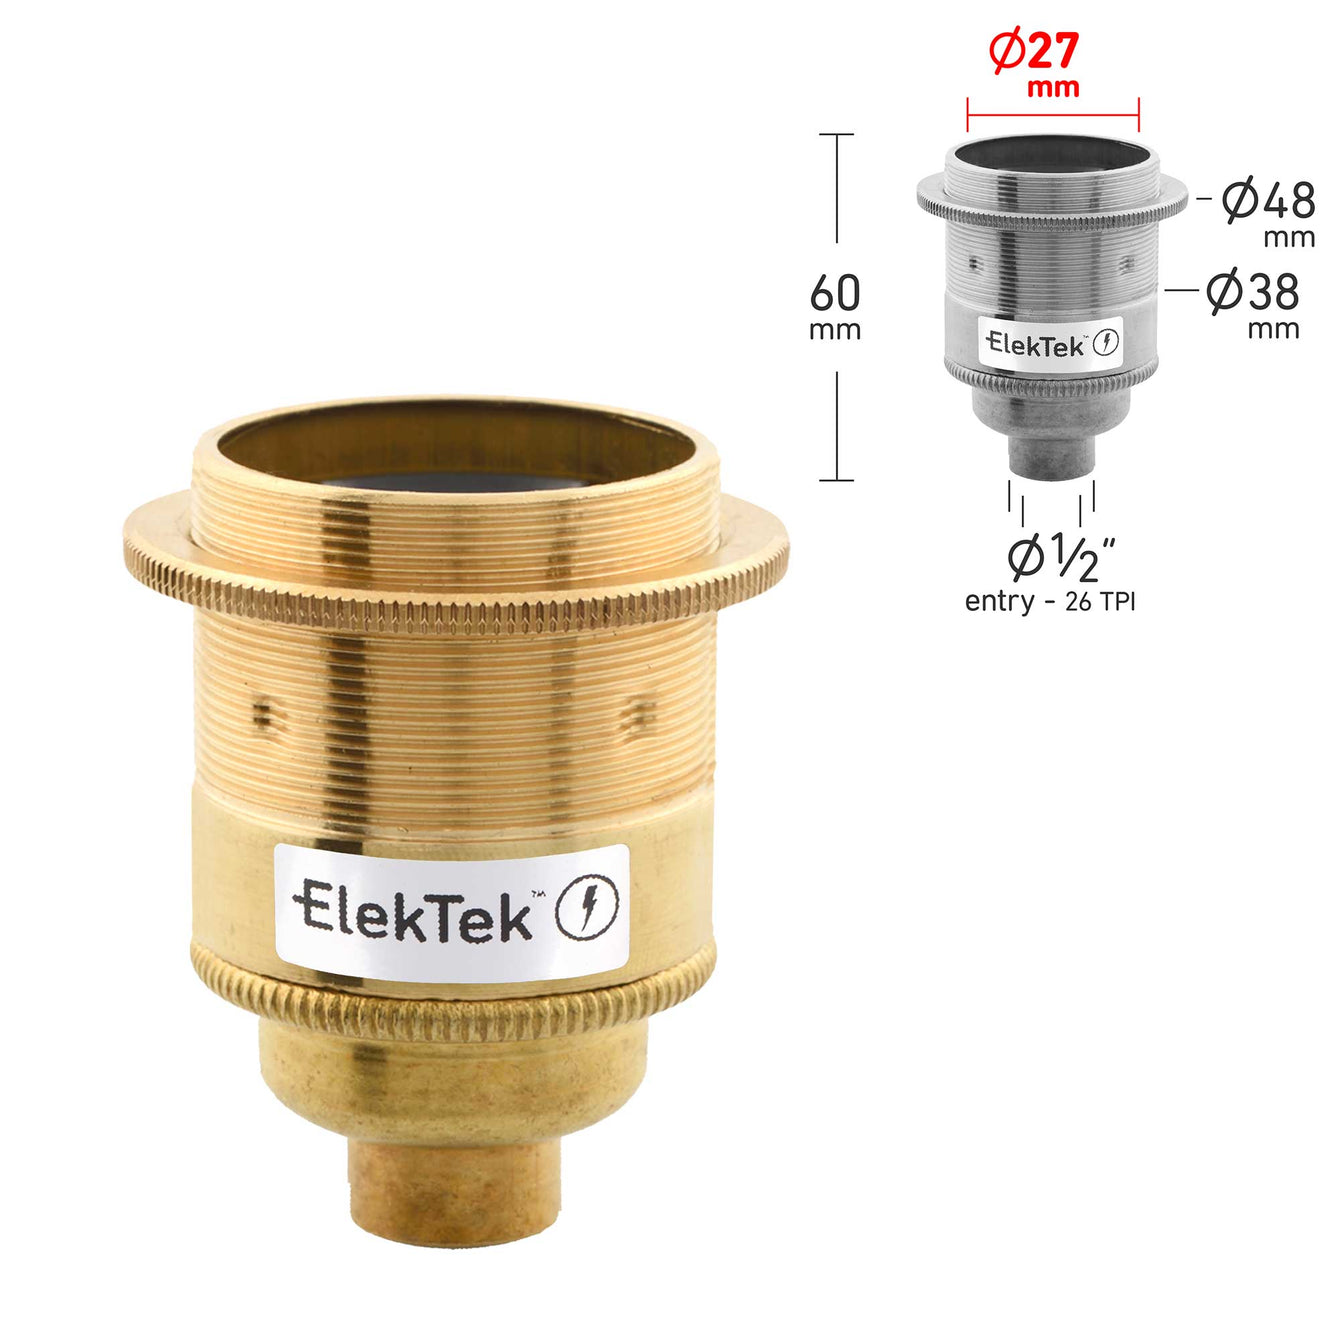 ElekTek ES Edison Screw E27 Lamp Holder With Shade Ring 10mm or Half Inch Entry Ideal for Vintage Filament Bulbs Brass - Buy It Better 